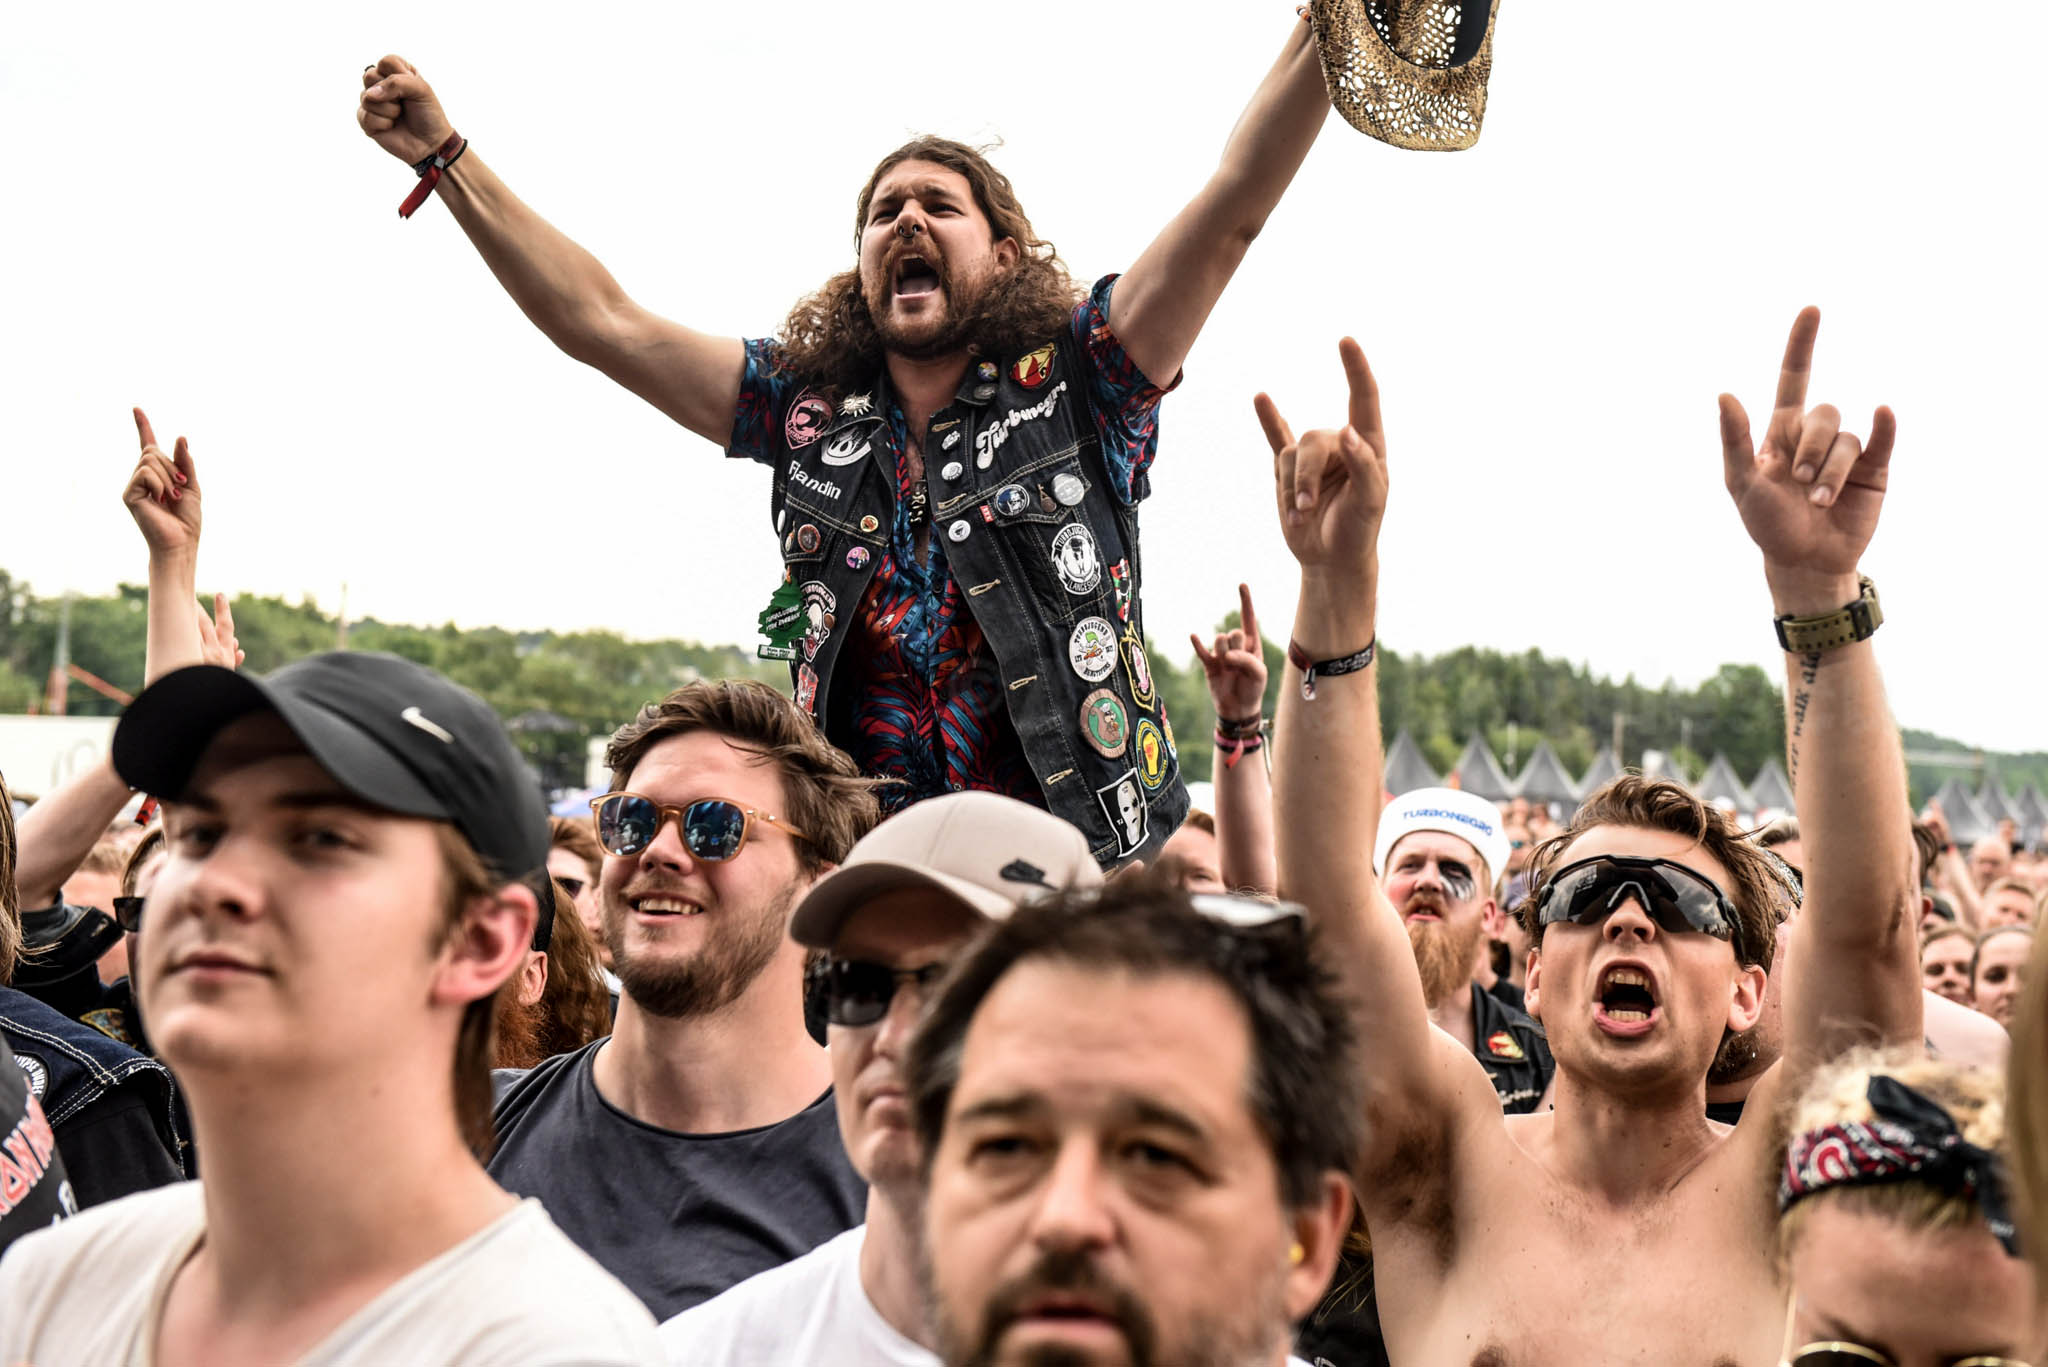 TONS OF ROCK FESTIVAL 2022 – CROWD IMAGES